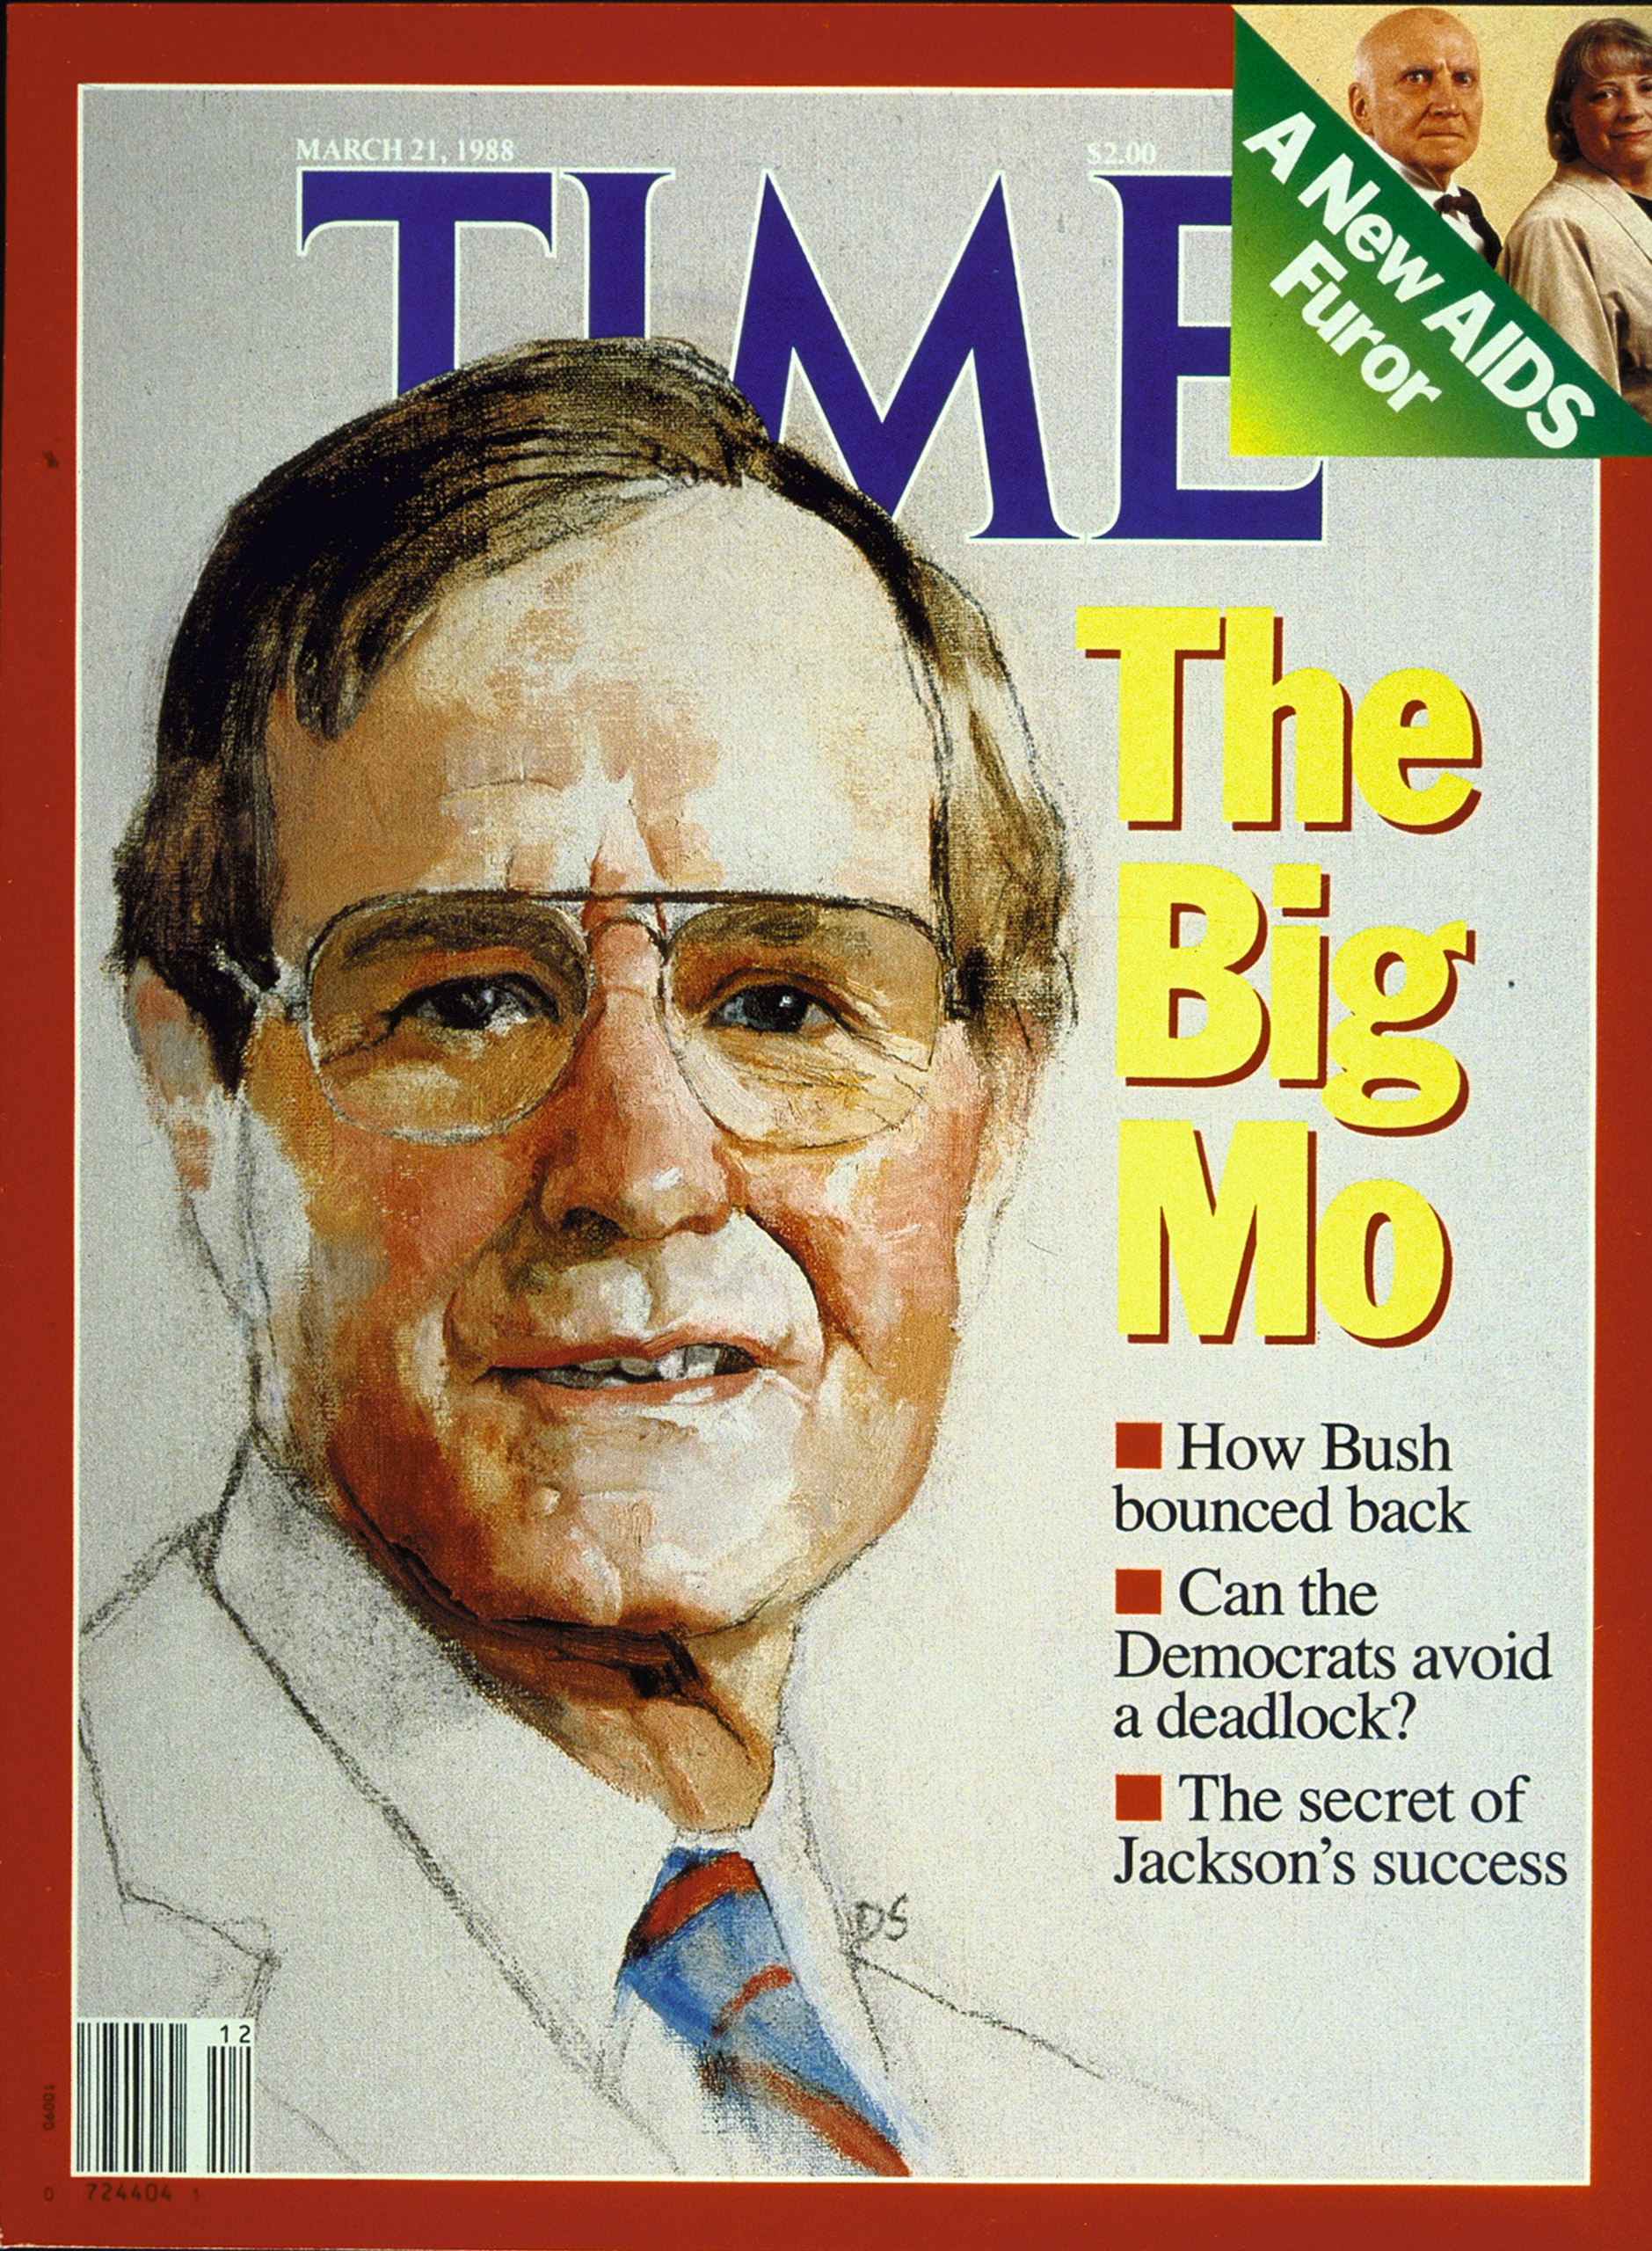 George H.W. Bush on the Mar. 21, 1988, cover of TIME. Illustration by Daniel Schwartz.